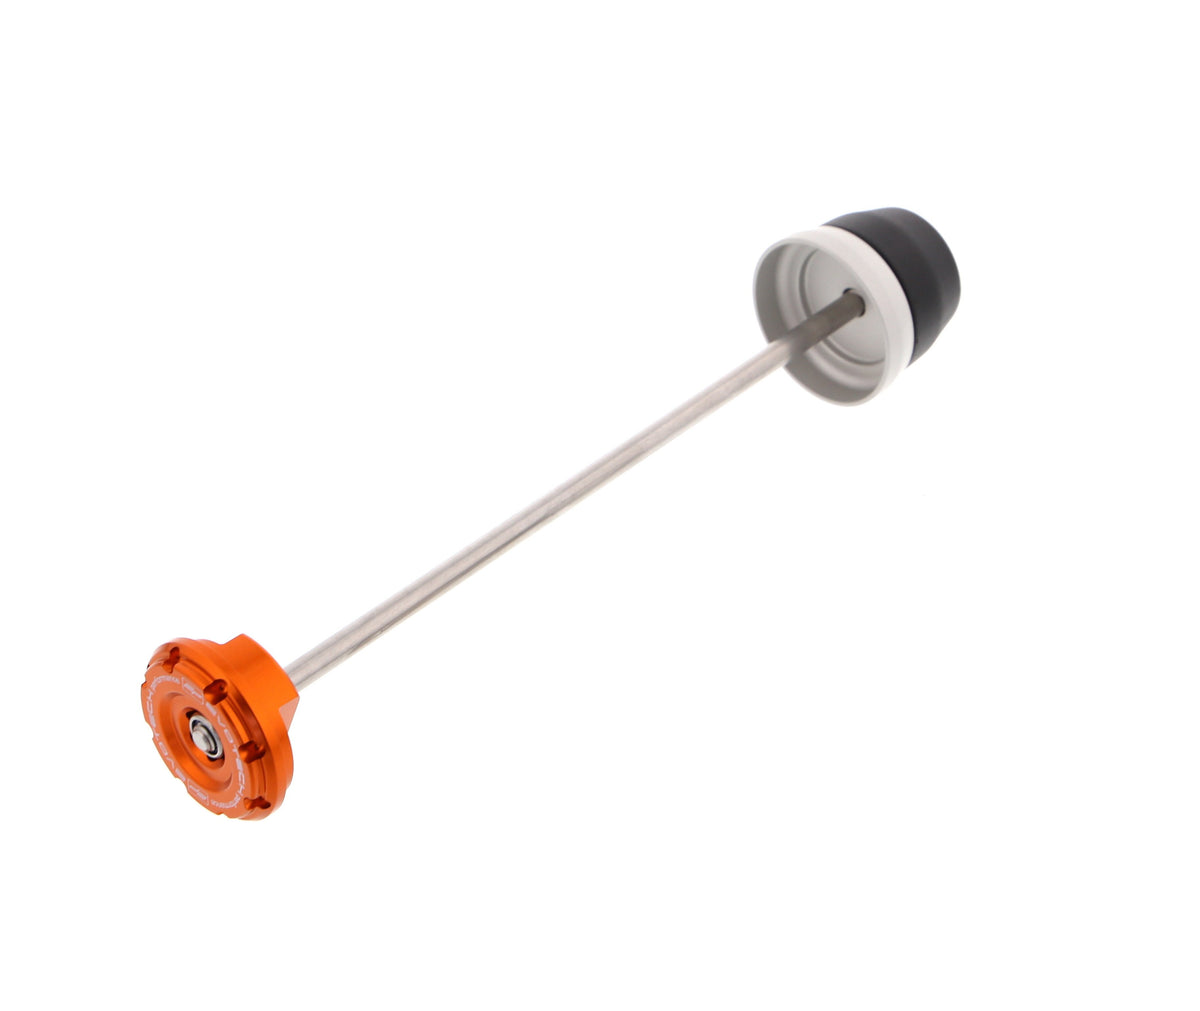 EP Rear Spindle Bobbins for the KTM 1290 Super Duke RR: crash protection for the motorcycles rear wheel. An aluminium and nylon bobbin for the nearside with an anodised orange hub stop for the offside, held together by a spindle rod.